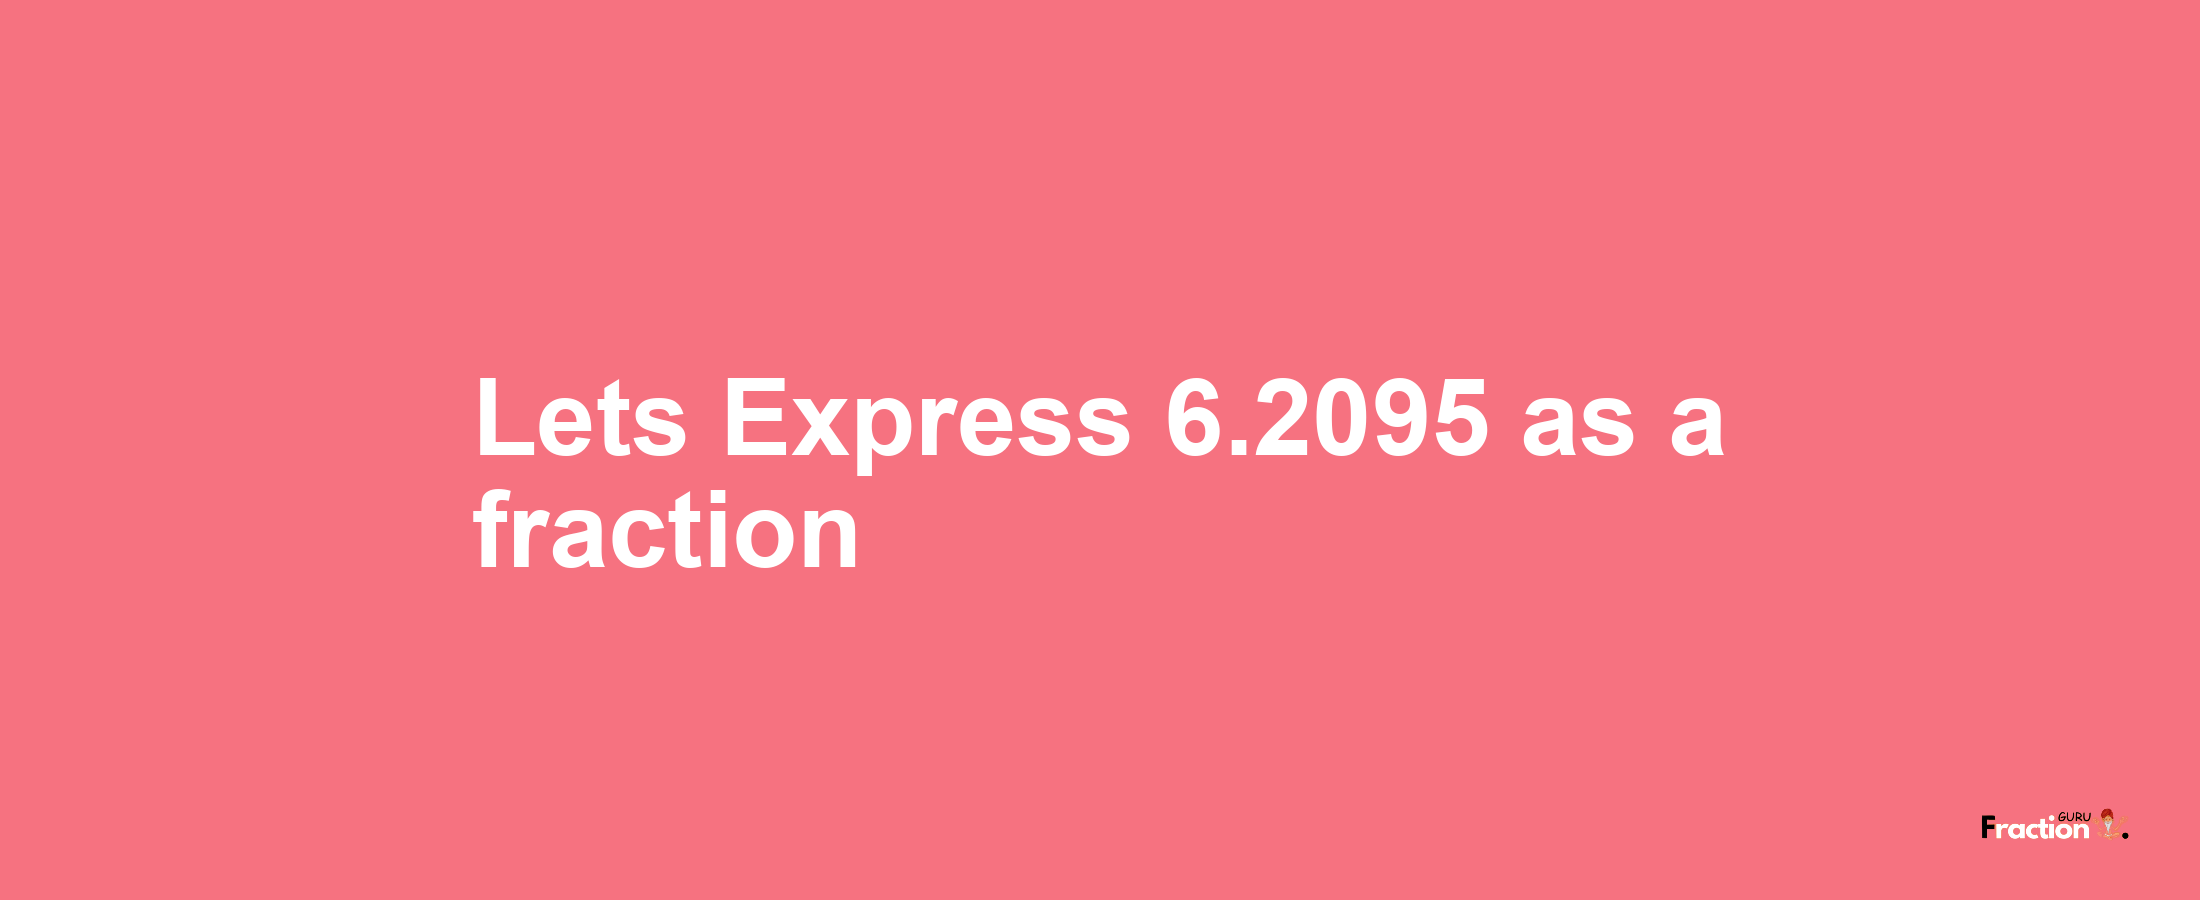 Lets Express 6.2095 as afraction